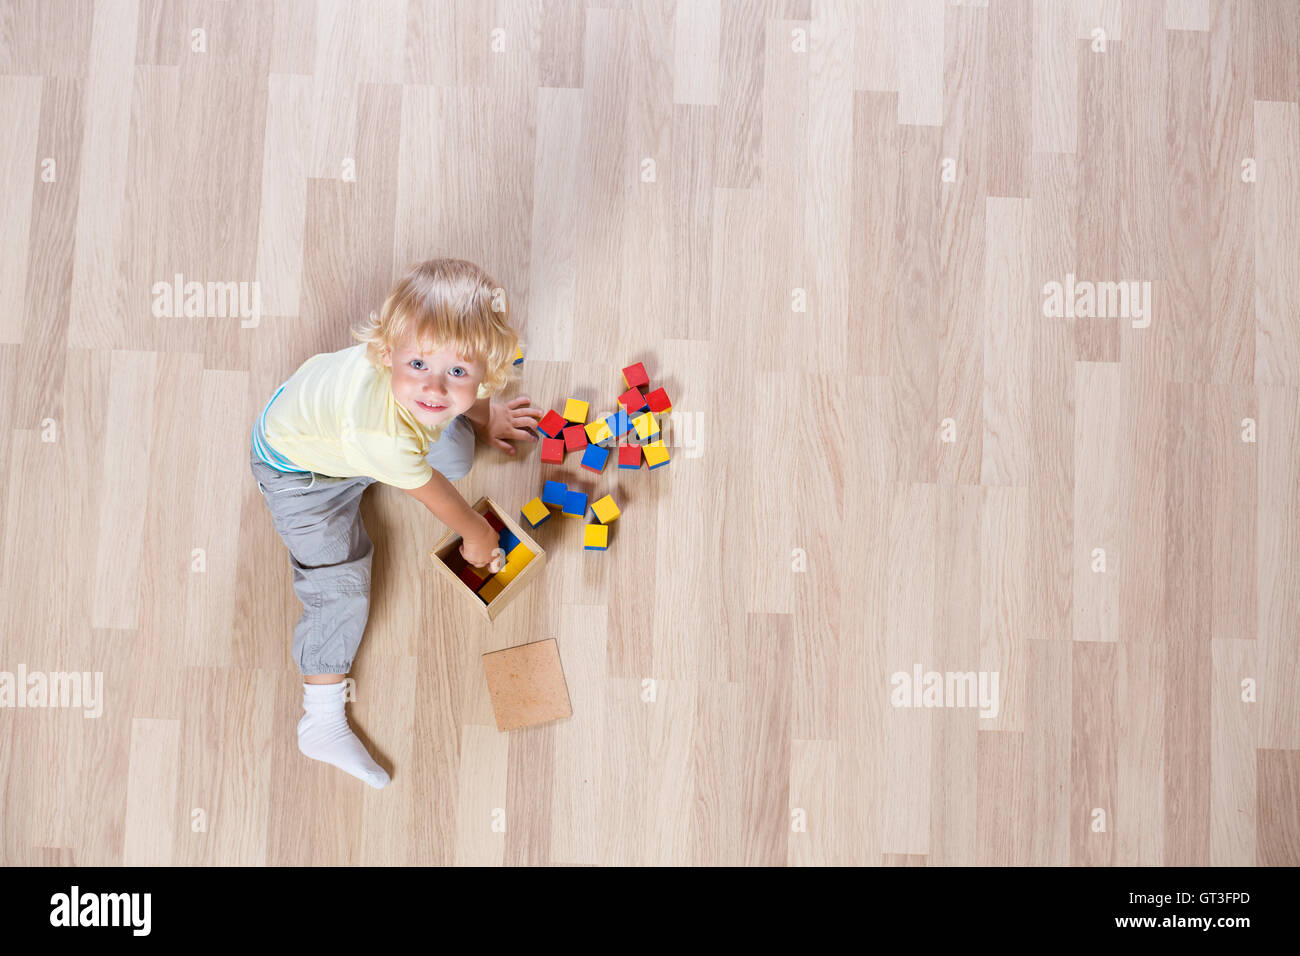 Kid playing with colorful toys on floor top view Stock Photo